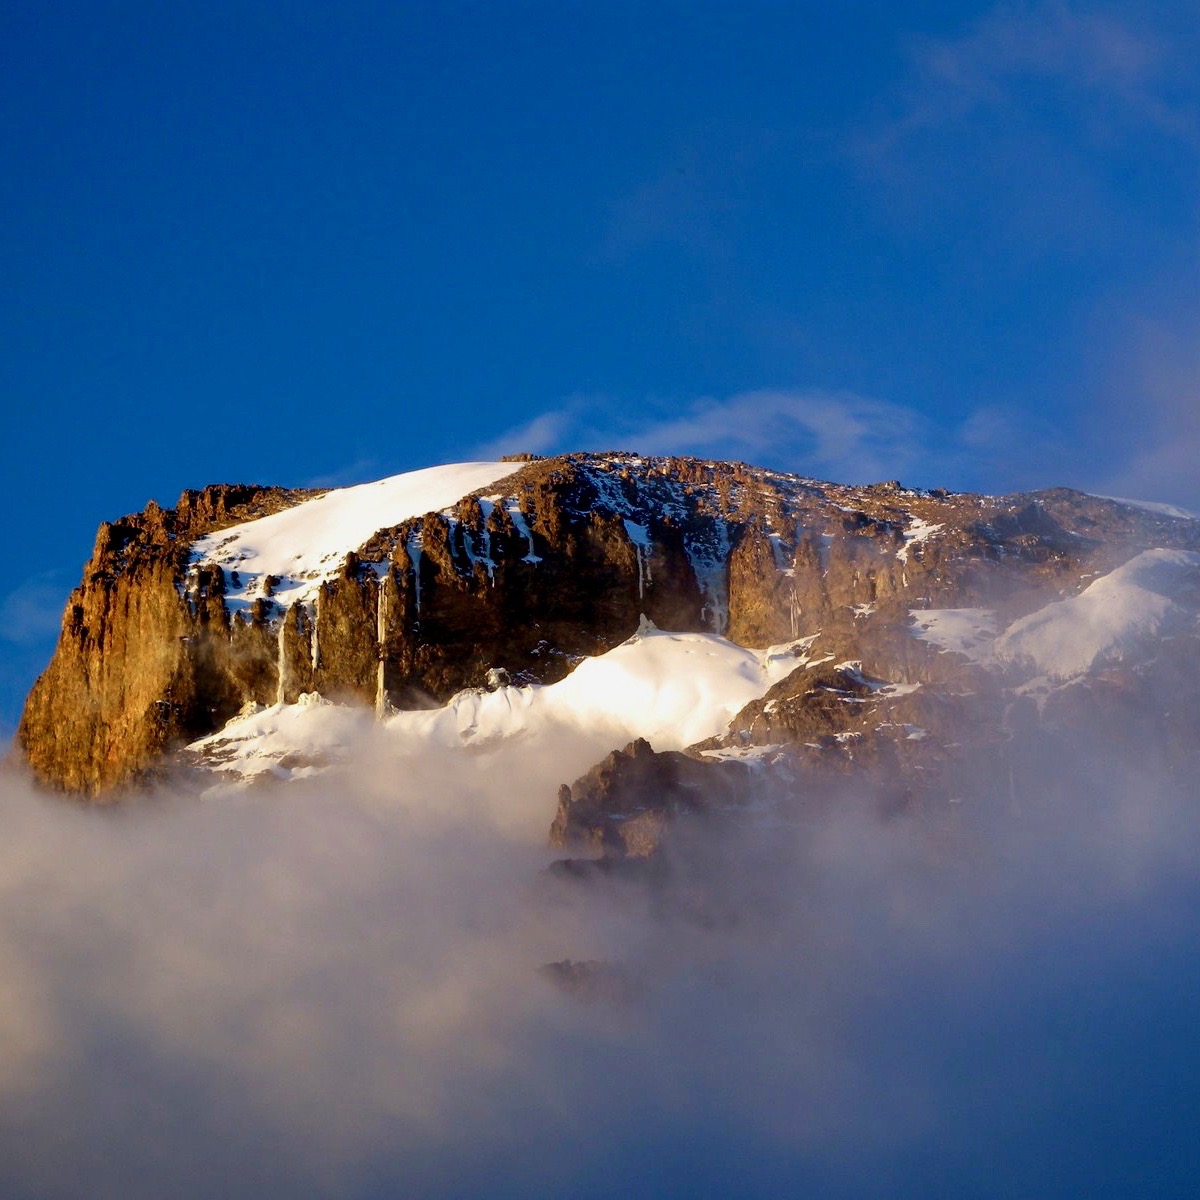 The summit of Mt. Kilimanjaro rises above the mist to a crisp blue sky.  The rocky face is brown in color with large patches of snow draped over the various cliffs.  This vantage point is halfway up the mountain climb to the top. 